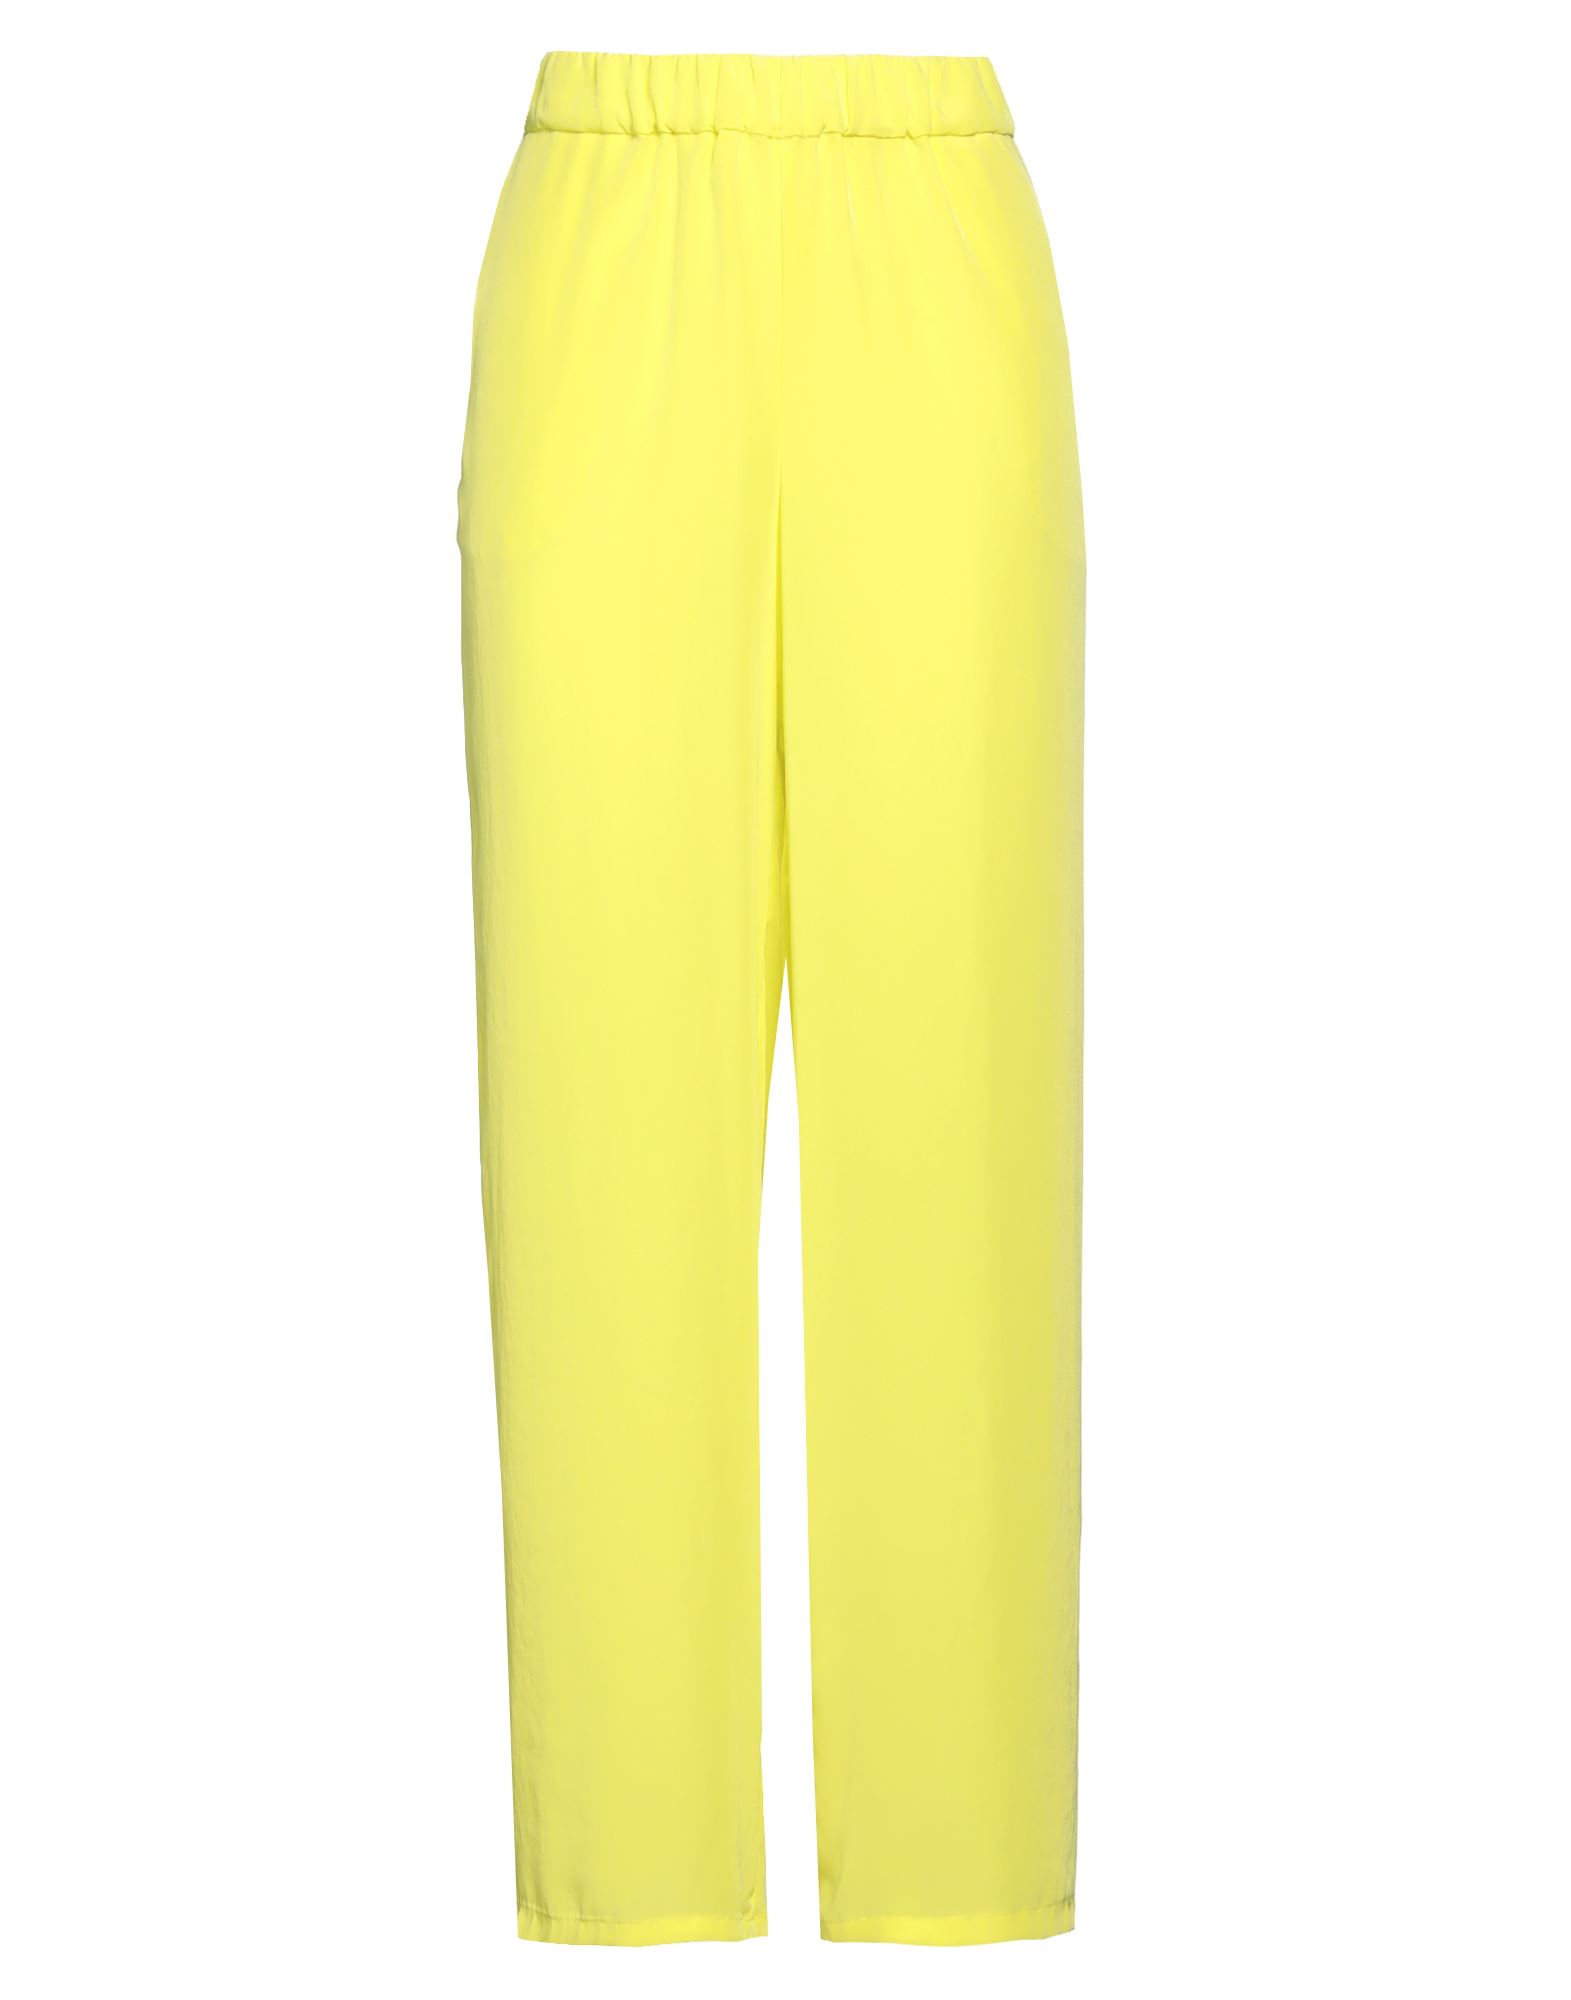 P.A.R.O.S.H P. A.R. O.S. H. WOMAN PANTS YELLOW SIZE XS POLYESTER